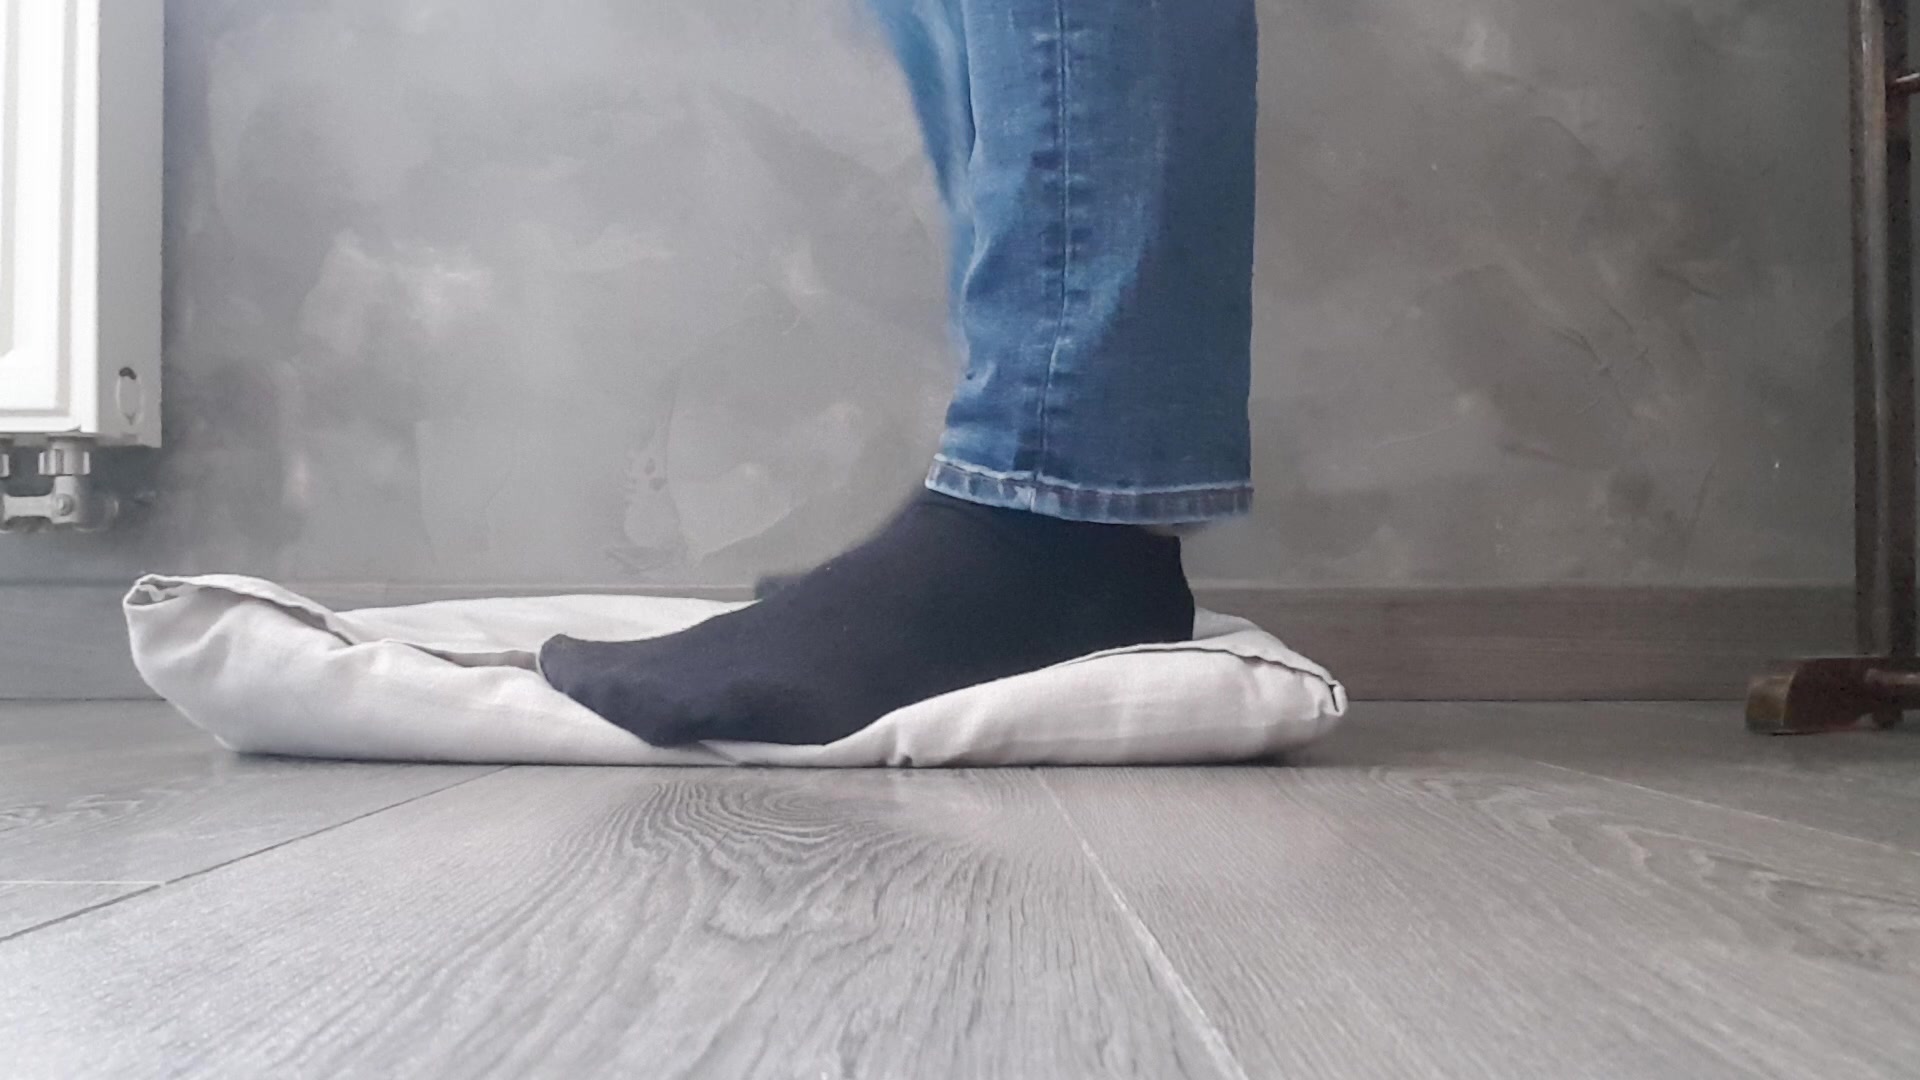 Stomping pillow with old socks